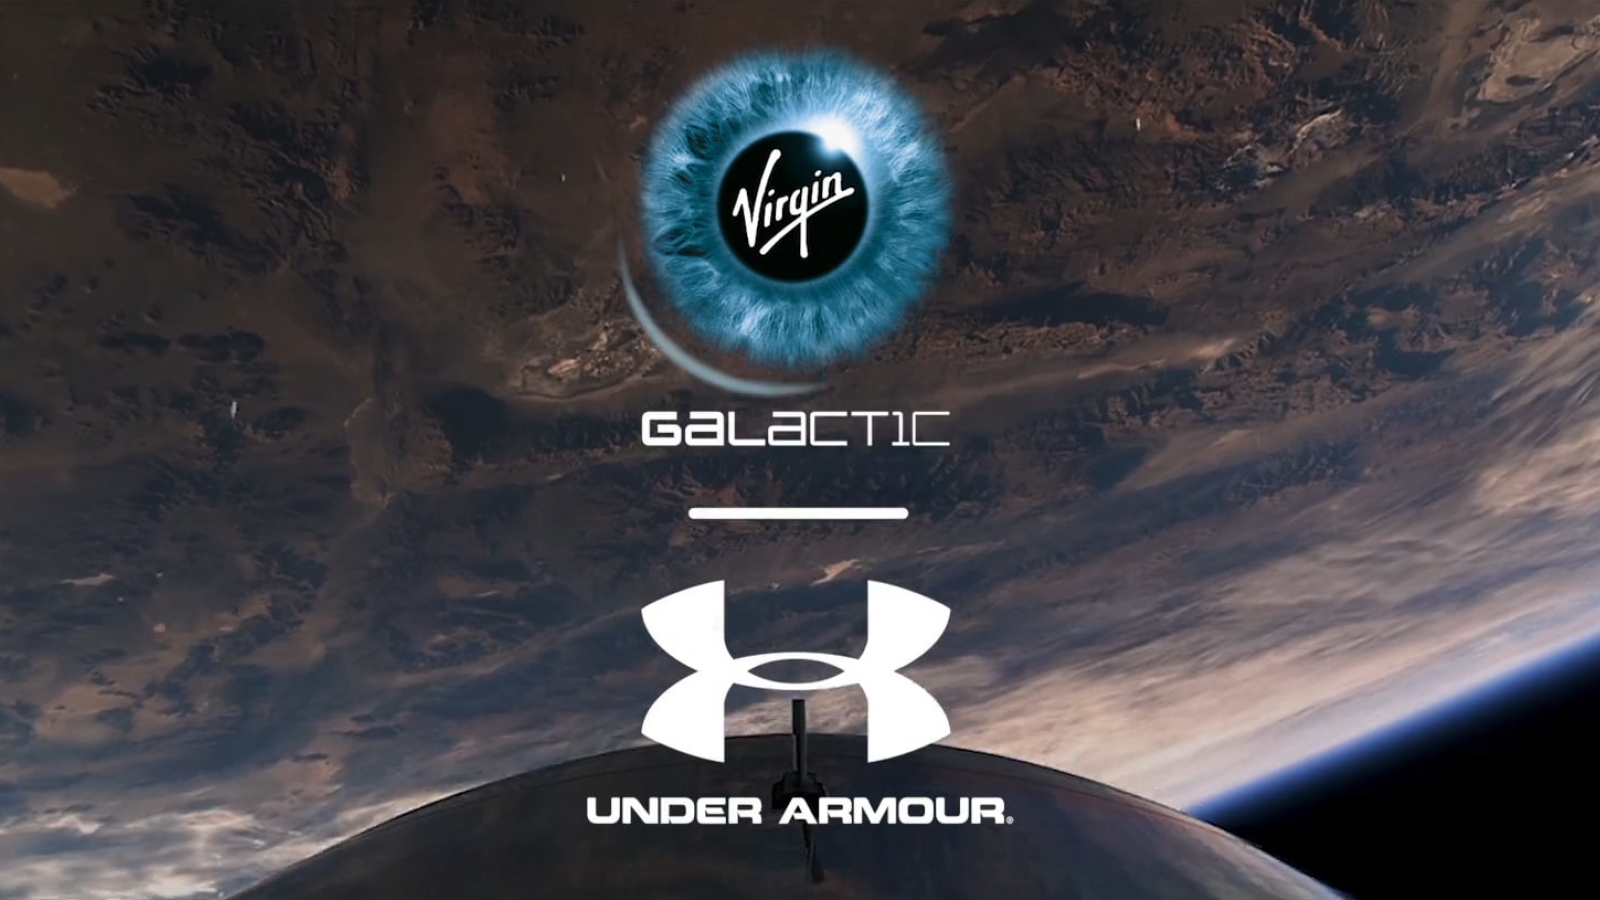 Under Armour Teams With Virgin Galactic To Create 'Spacewear' For Future Passengers